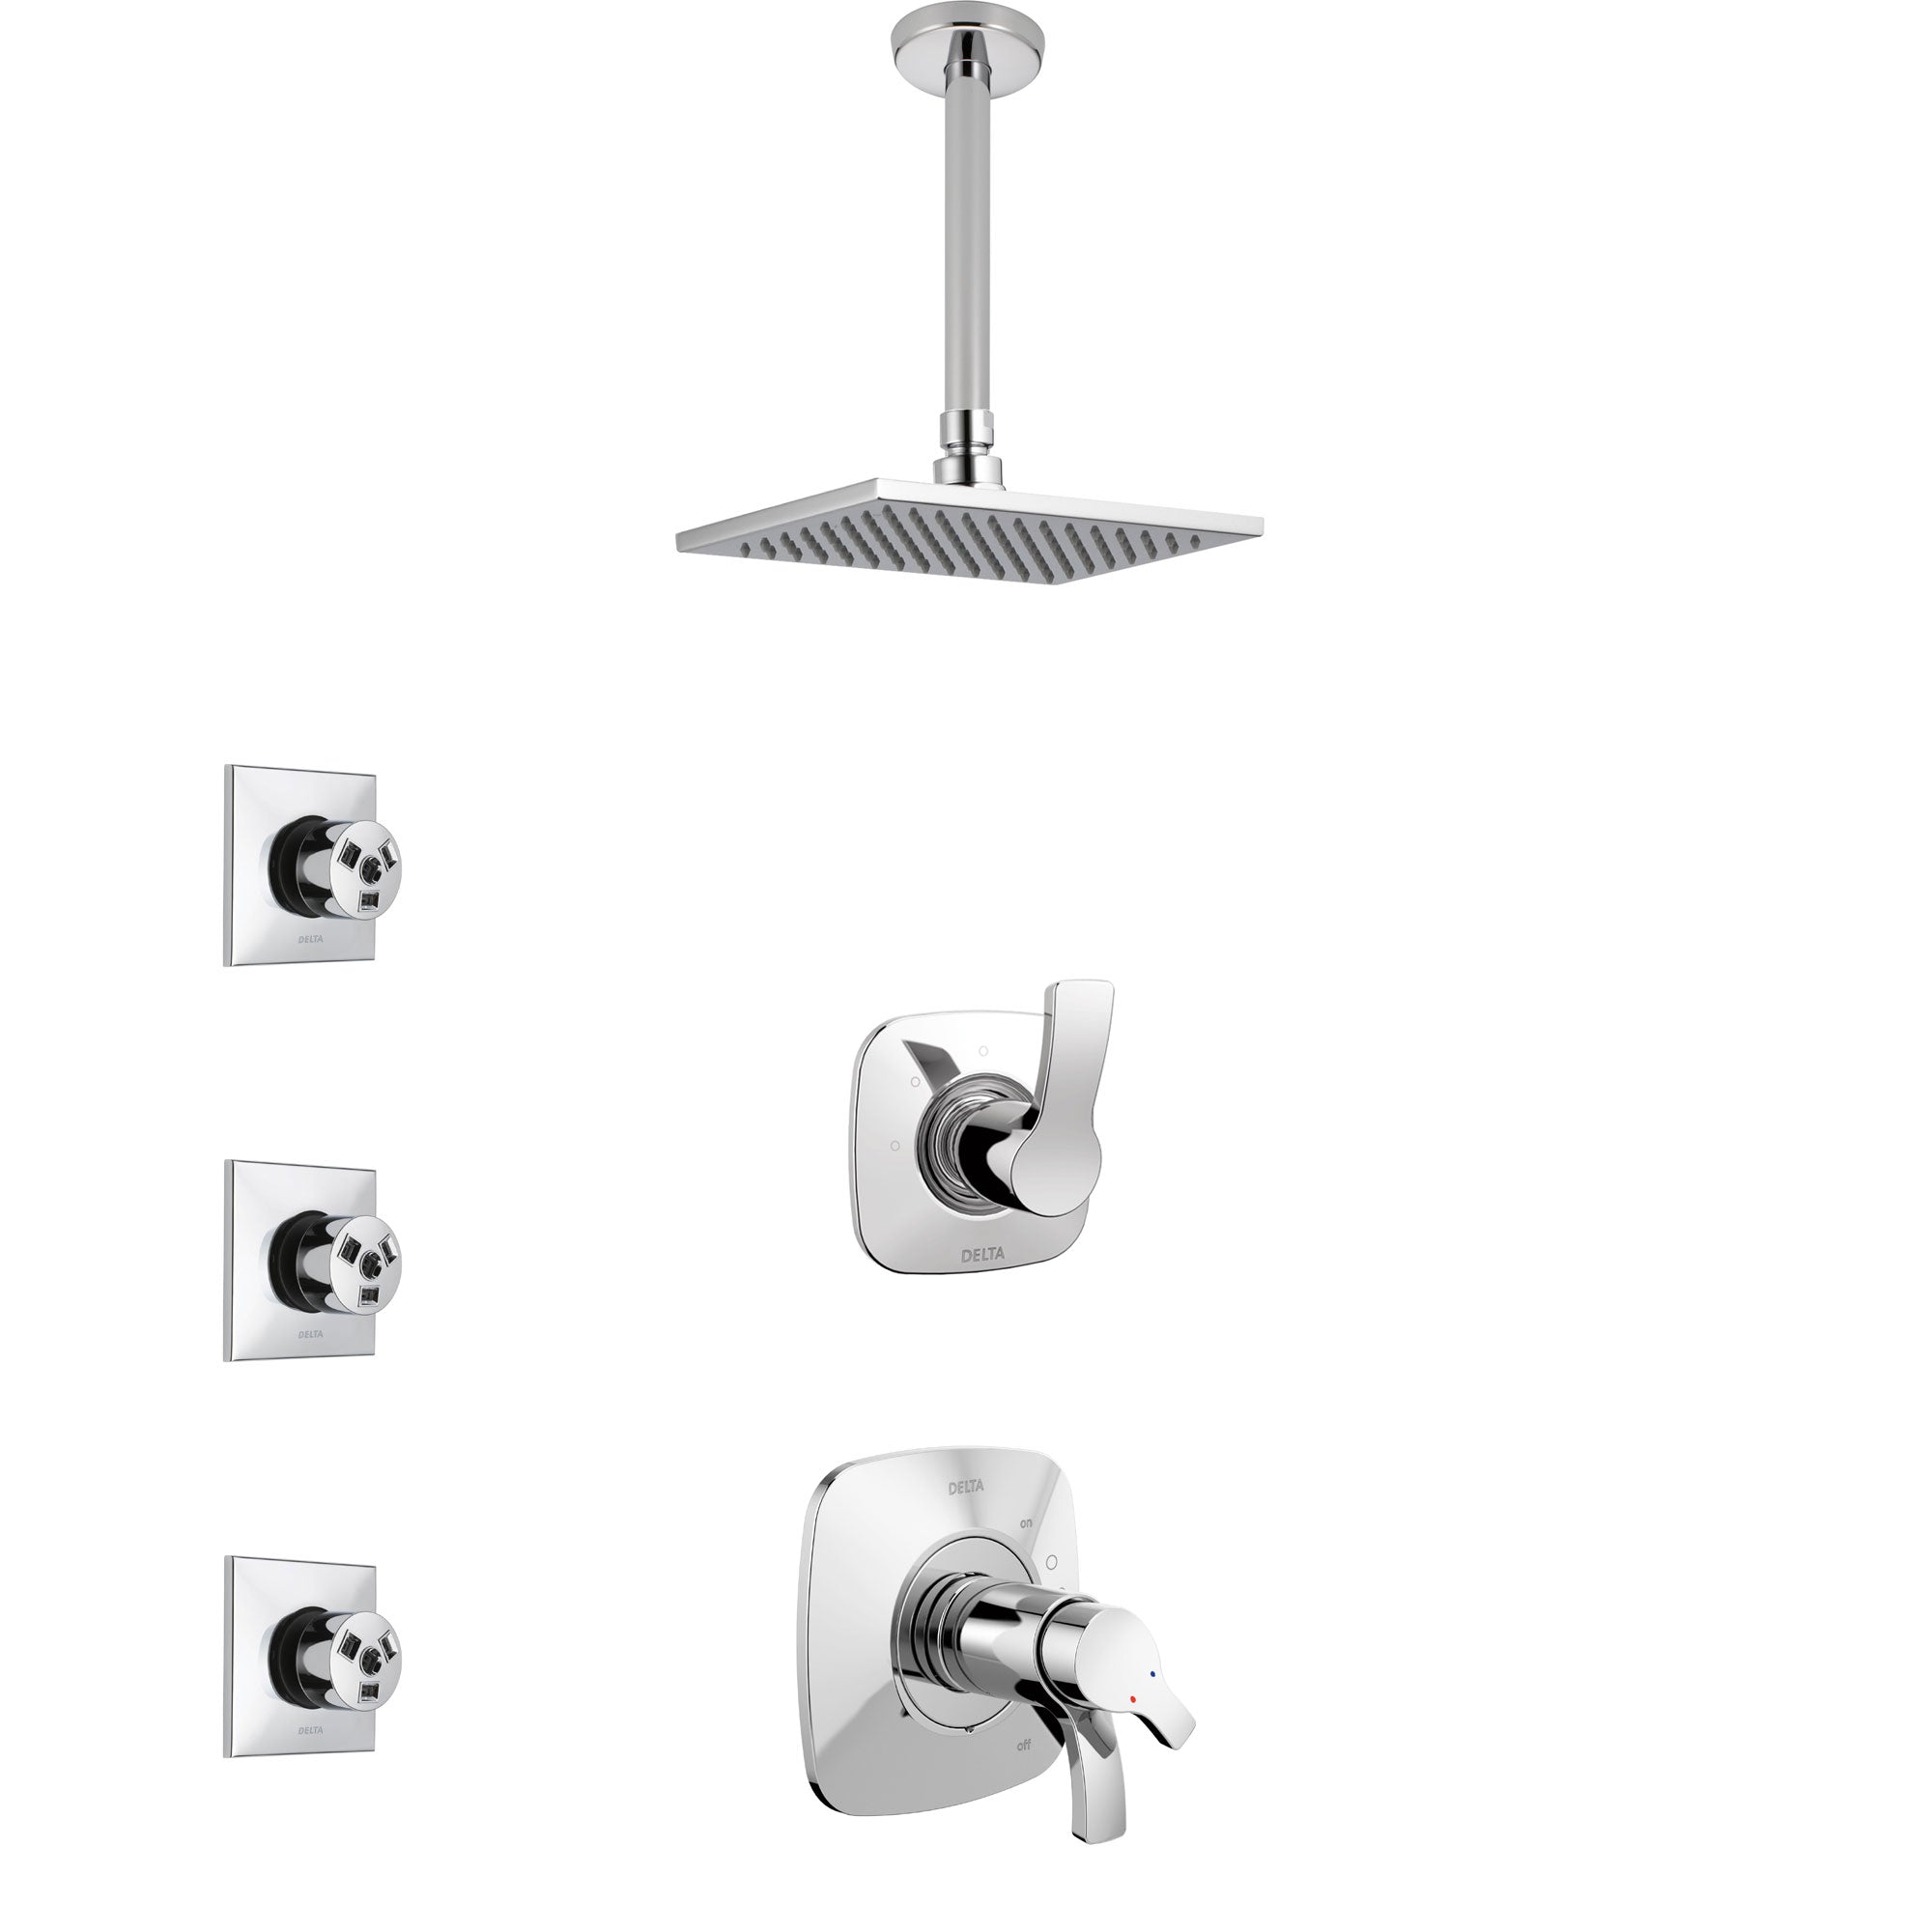 Delta Tesla Chrome Finish Shower System with Dual Thermostatic Control Handle, Diverter, Ceiling Mount Showerhead, and 3 Body Sprays SS17T5223